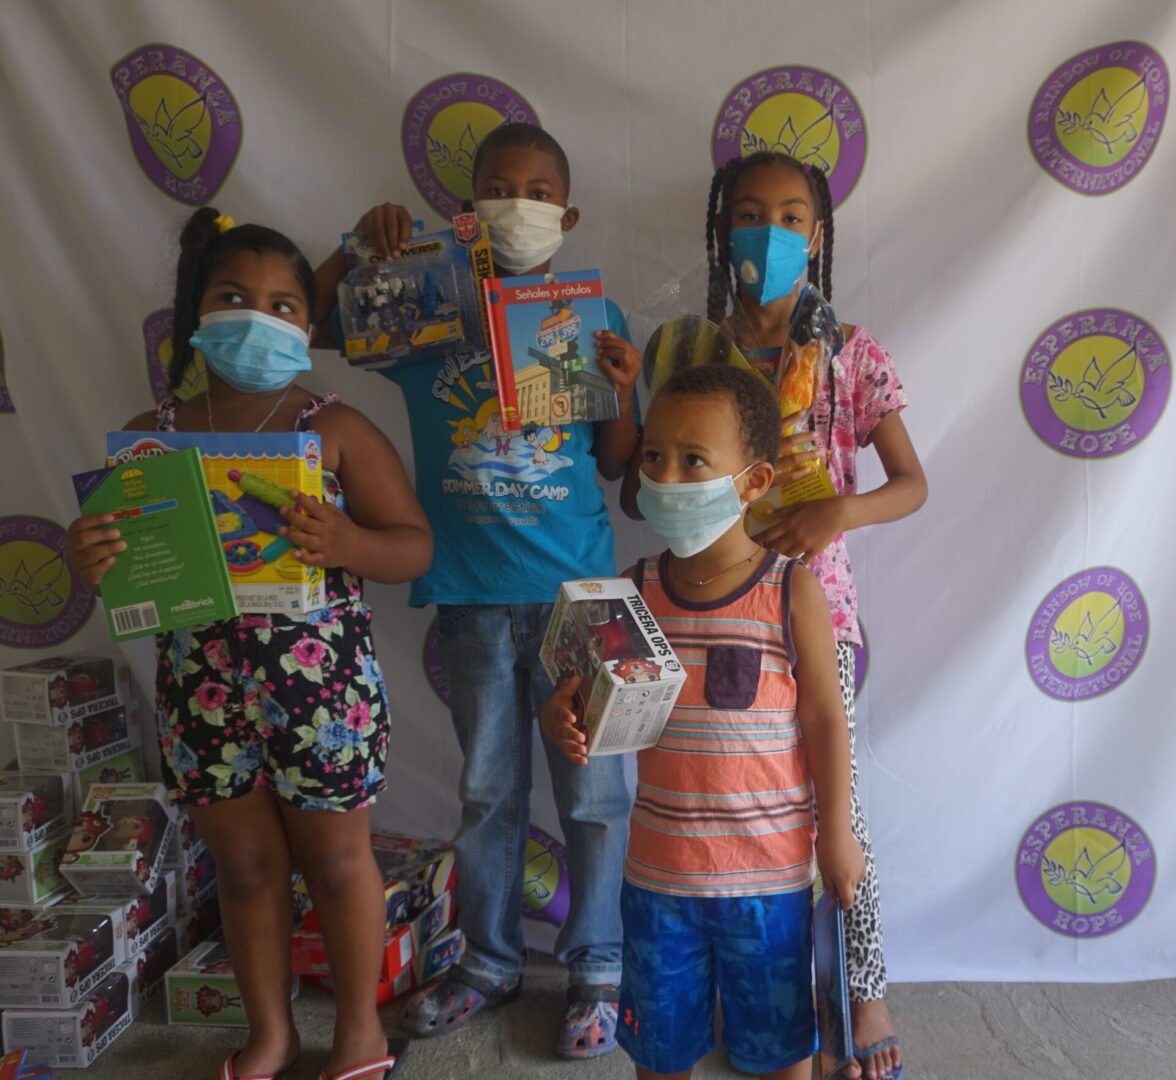 Four children standing against the Esperanza-Hope backdrop with their toys and books